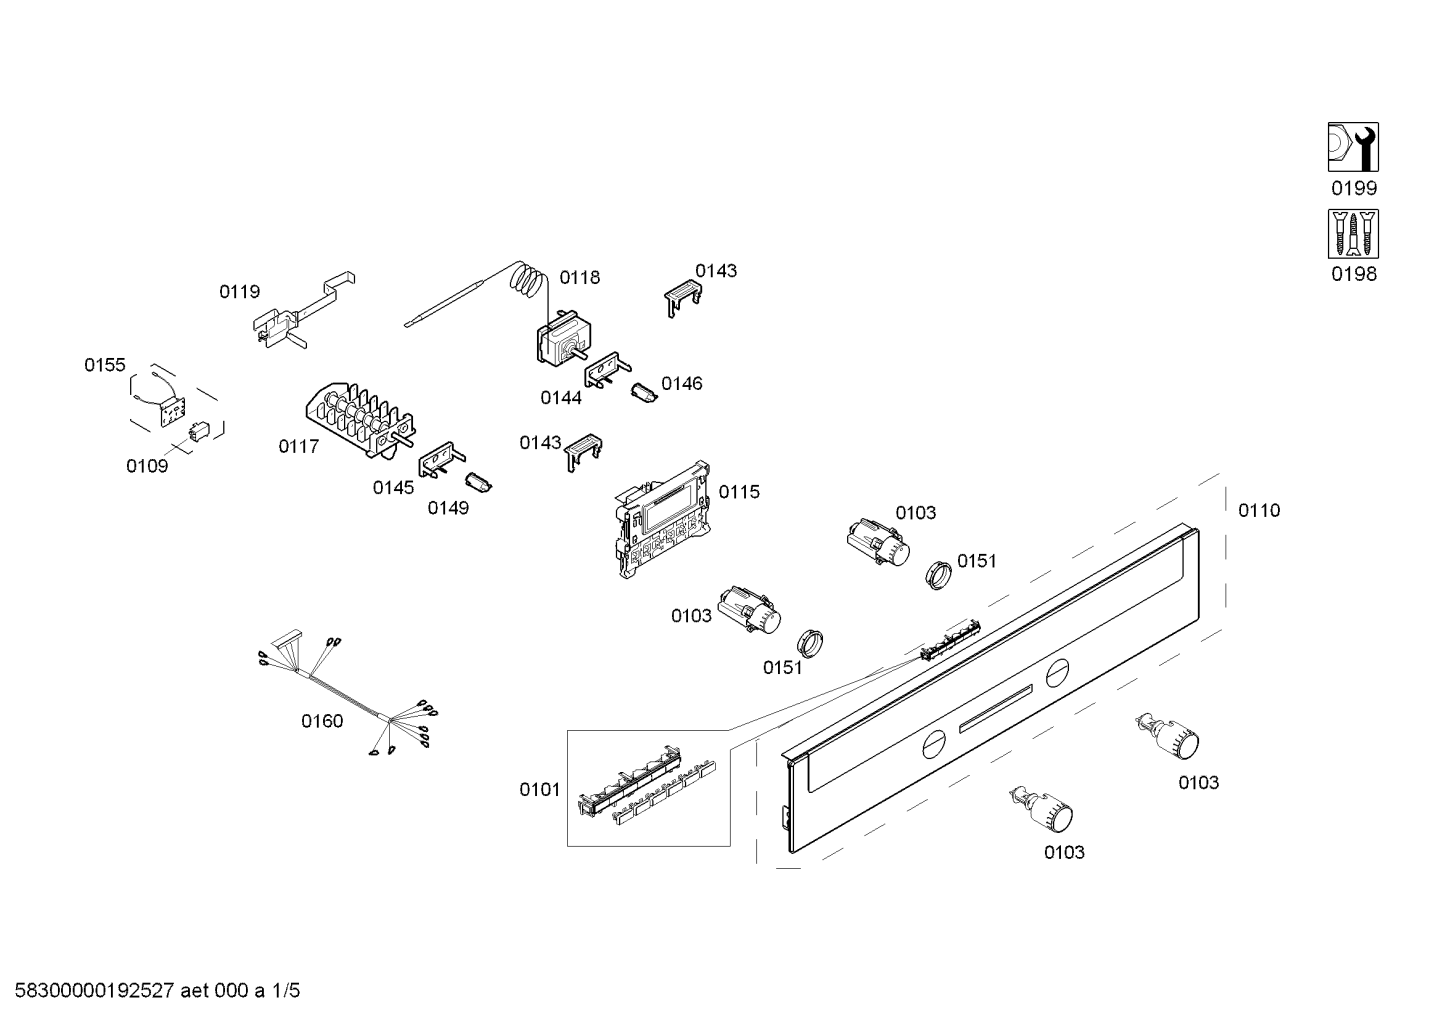 drawing_link_1_device_1810050